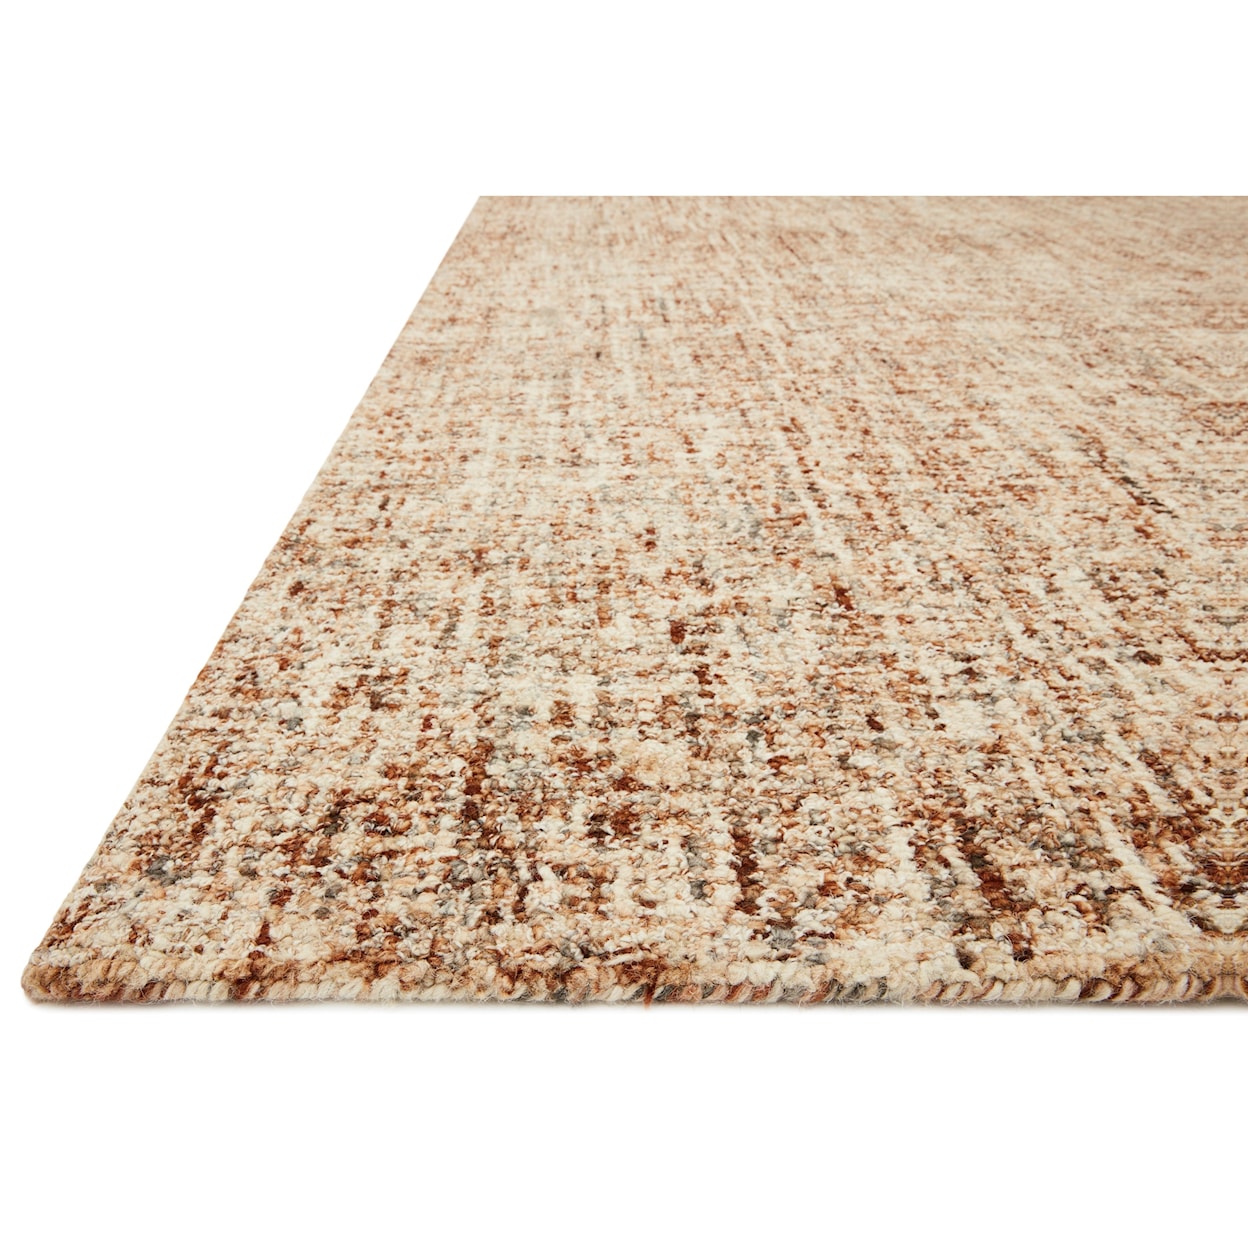 Reeds Rugs Harlow 2'6" x 7'6" Rust / Charcoal Rug